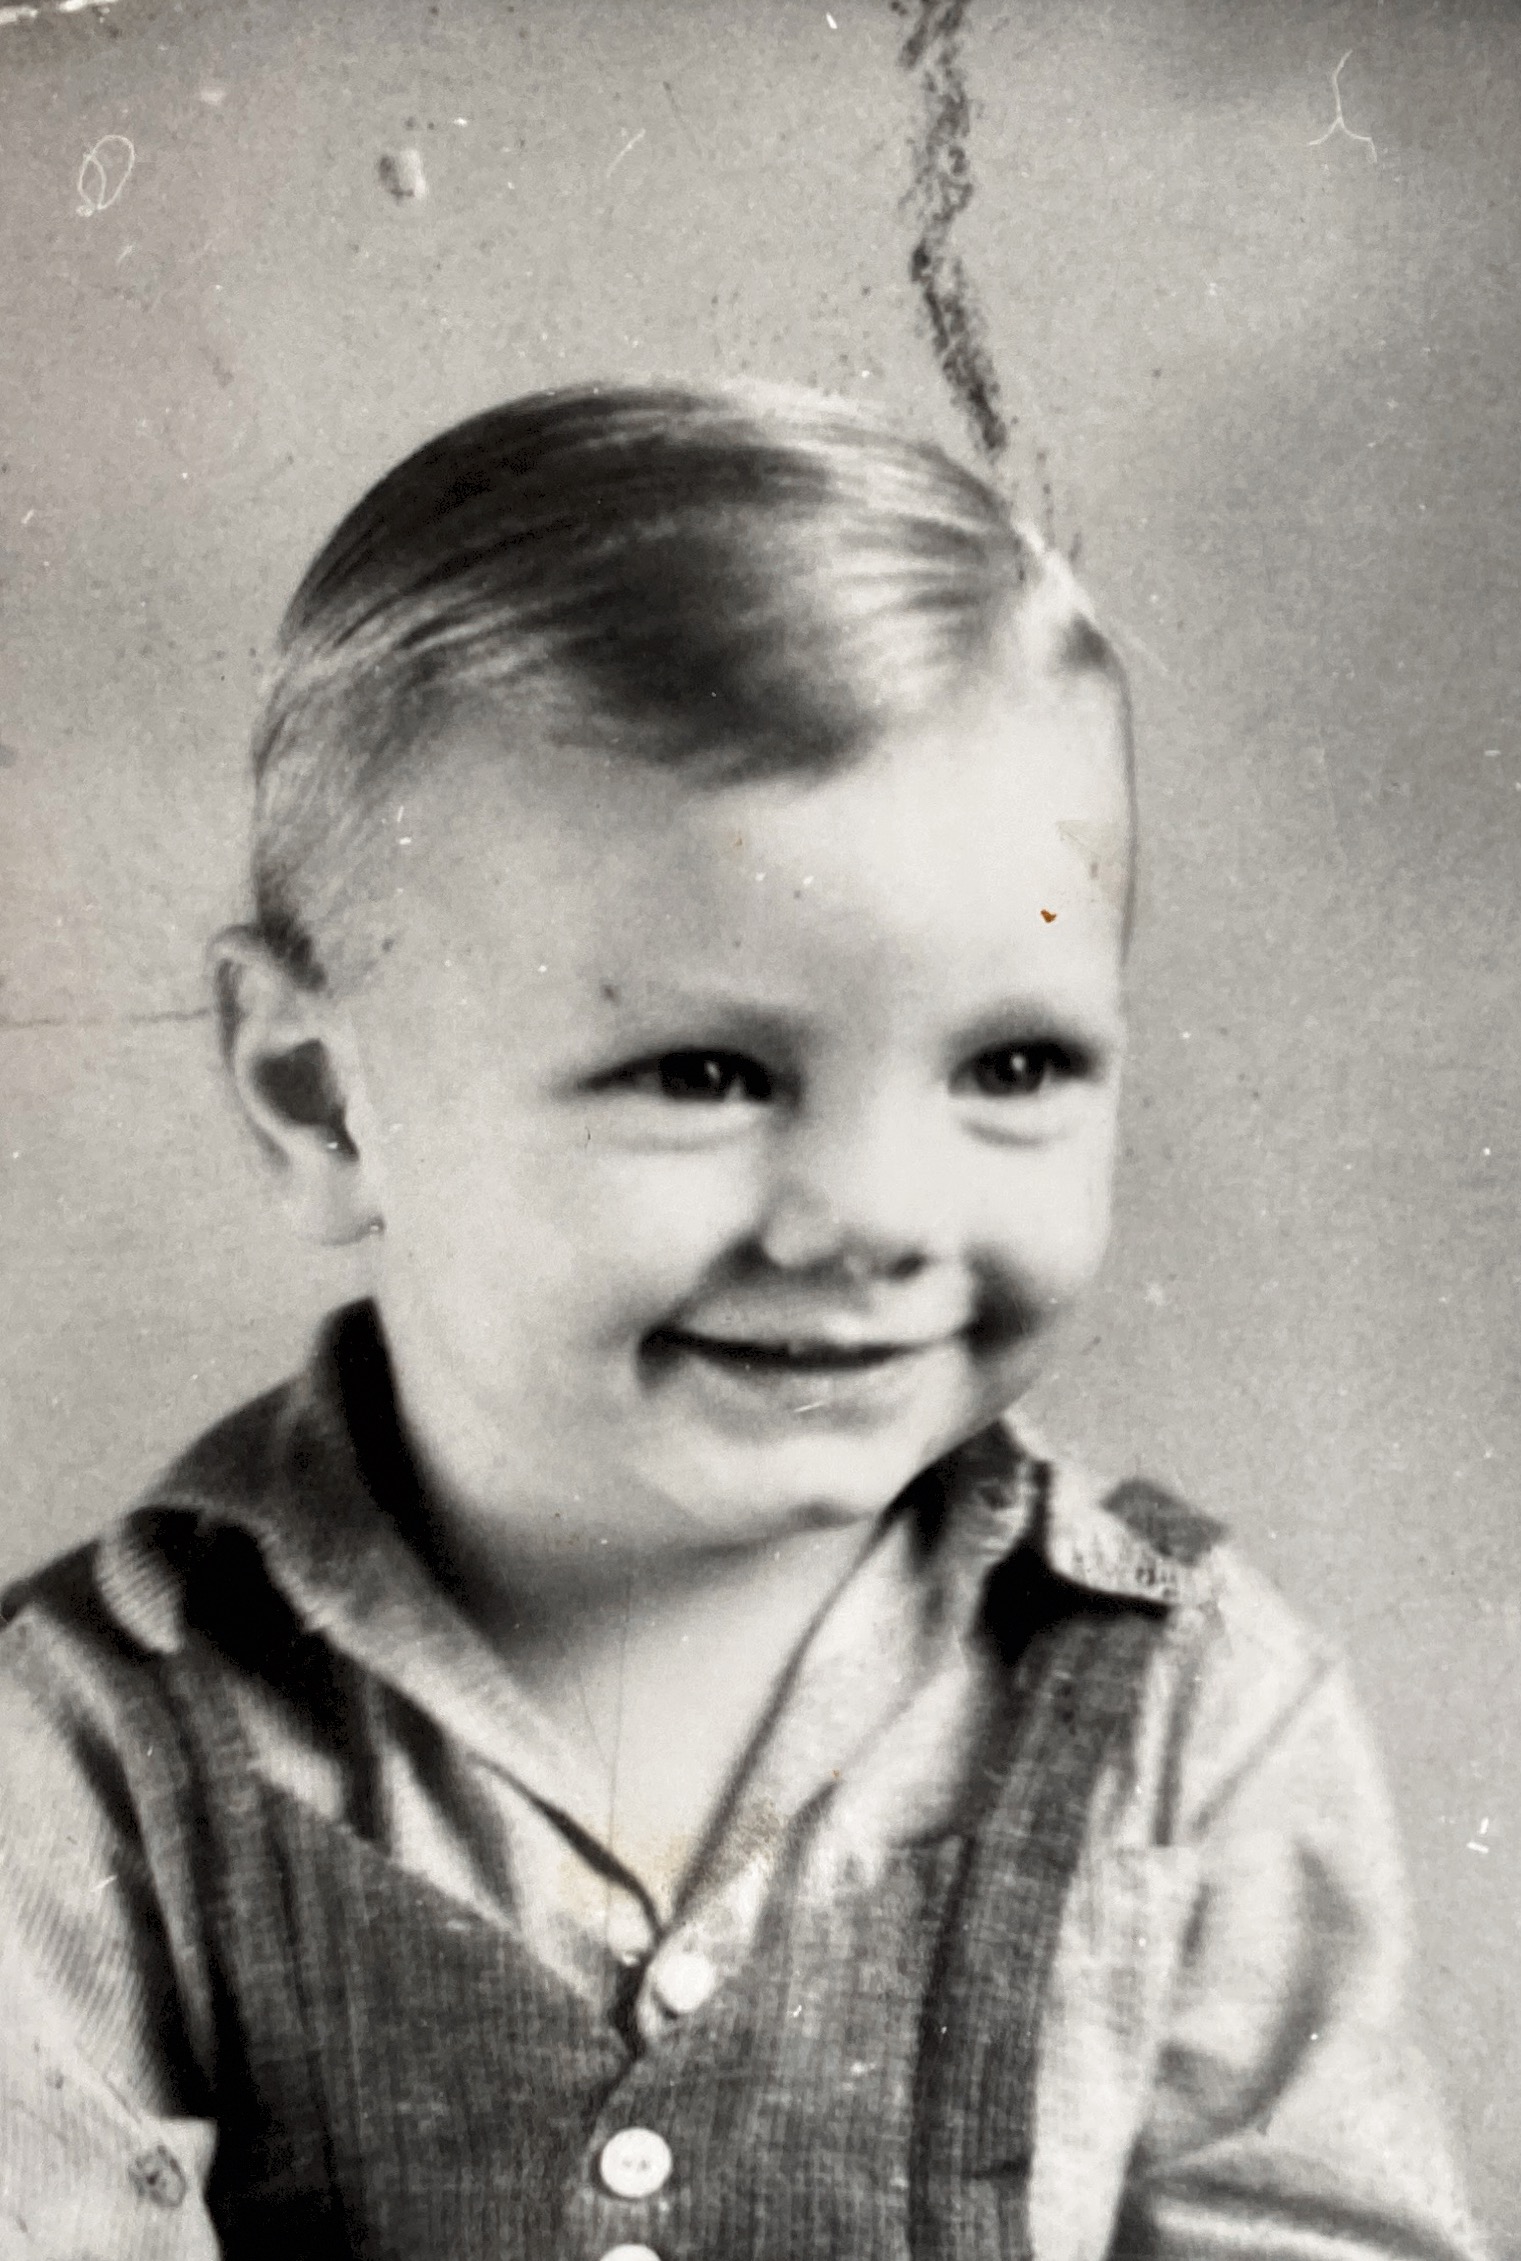 Carl Easter 2 yrs old 1938